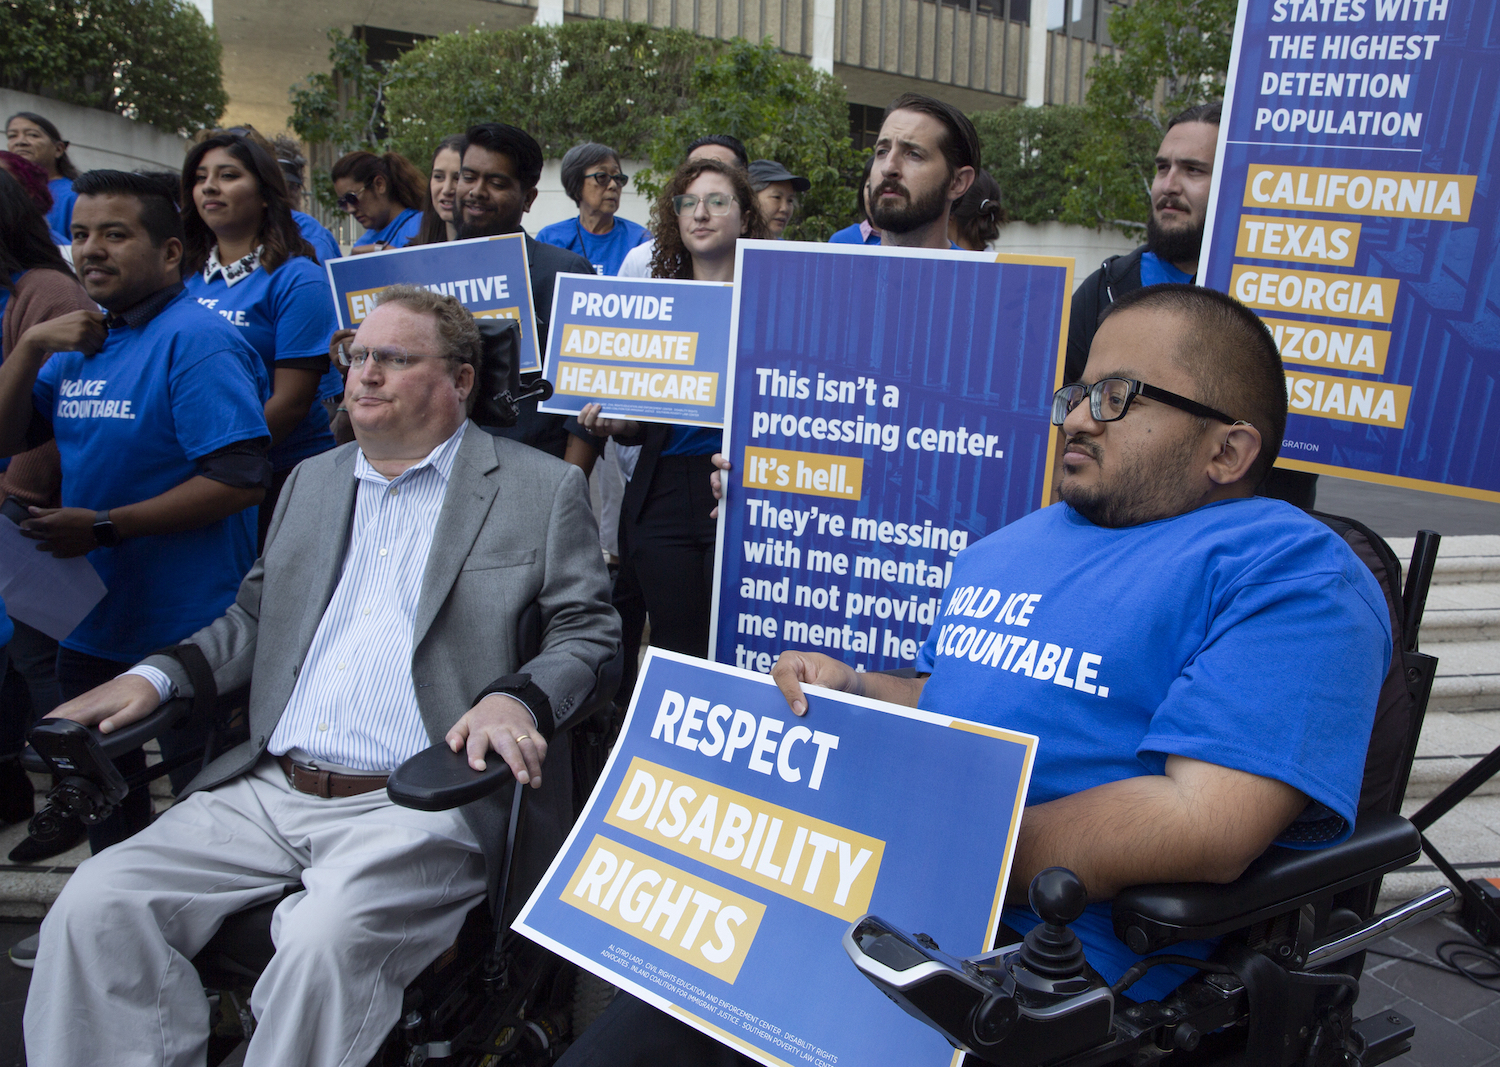 Individuals at a criminal justice and disability rights demonstration, with signs reading "Respect Disability Rights."